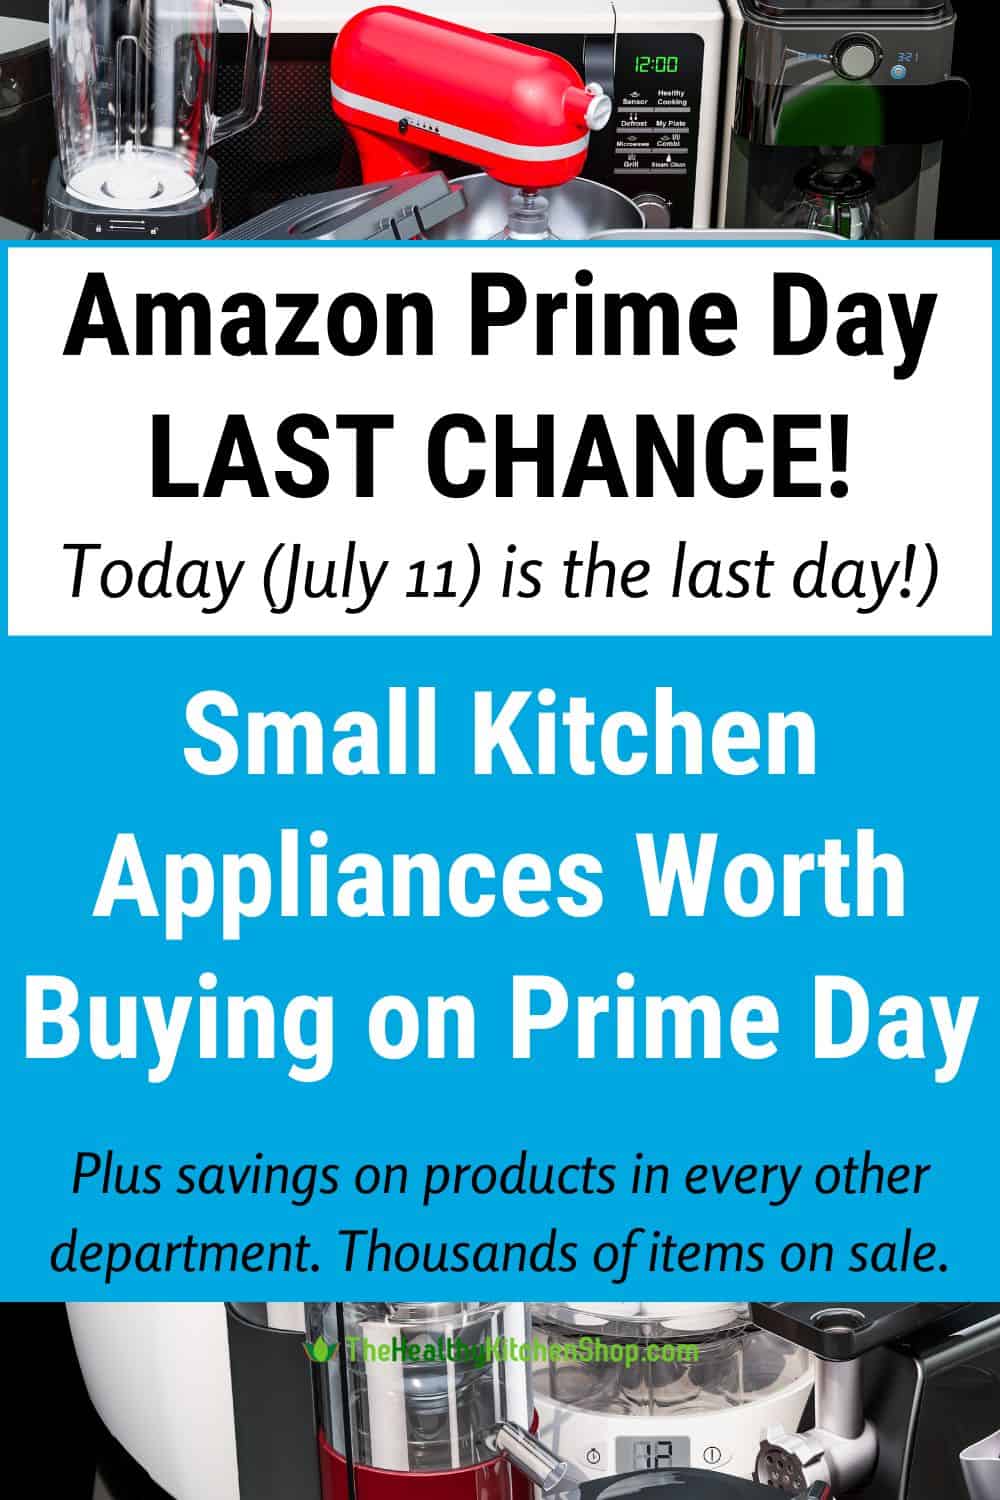 Small Kitchen Appliances Worth Buying on Prime Day